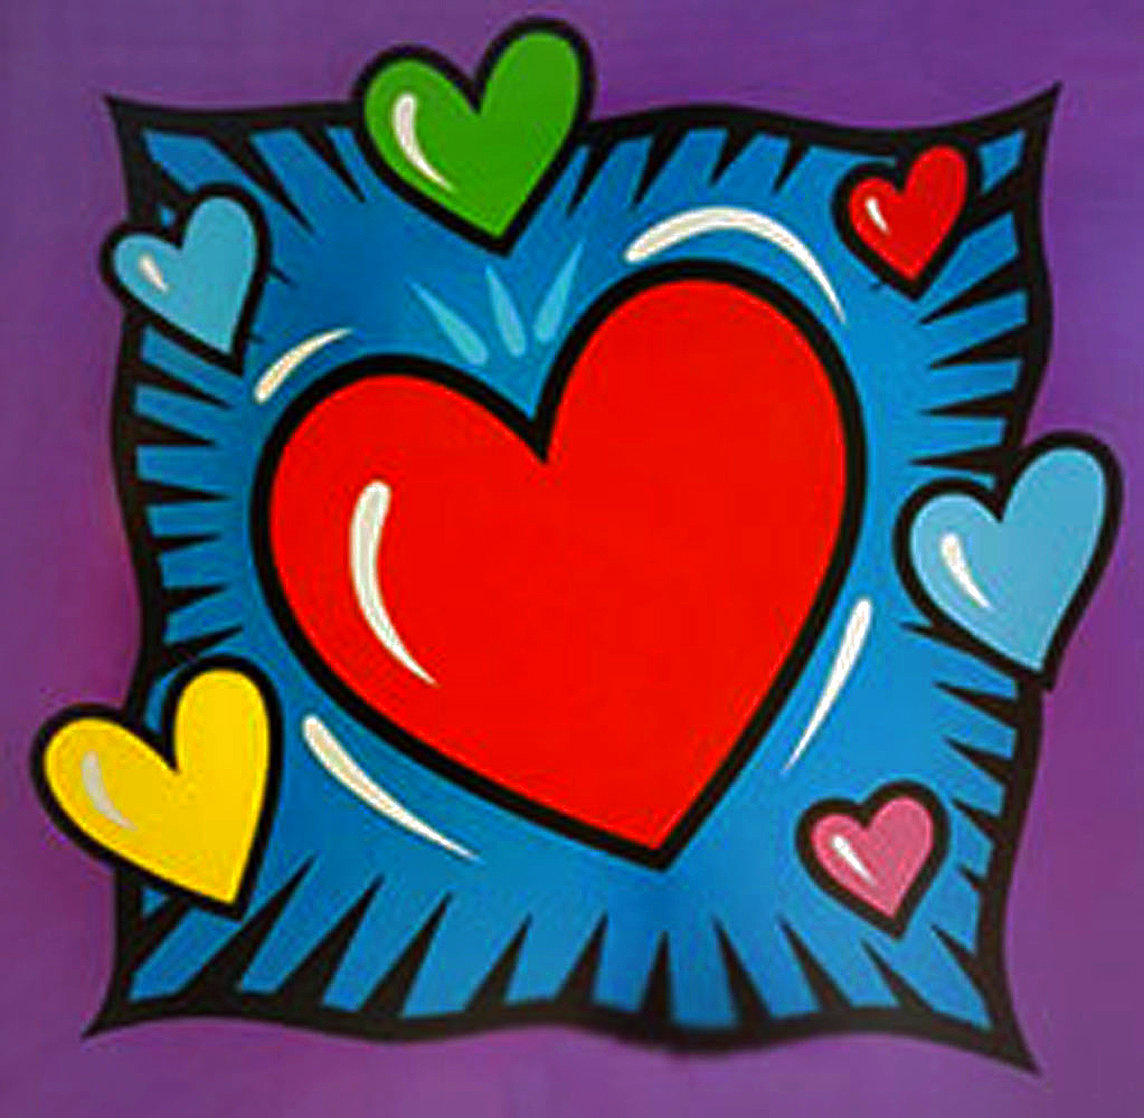 I Love You Hearts 2006 Limited Edition Print by Burton Morris